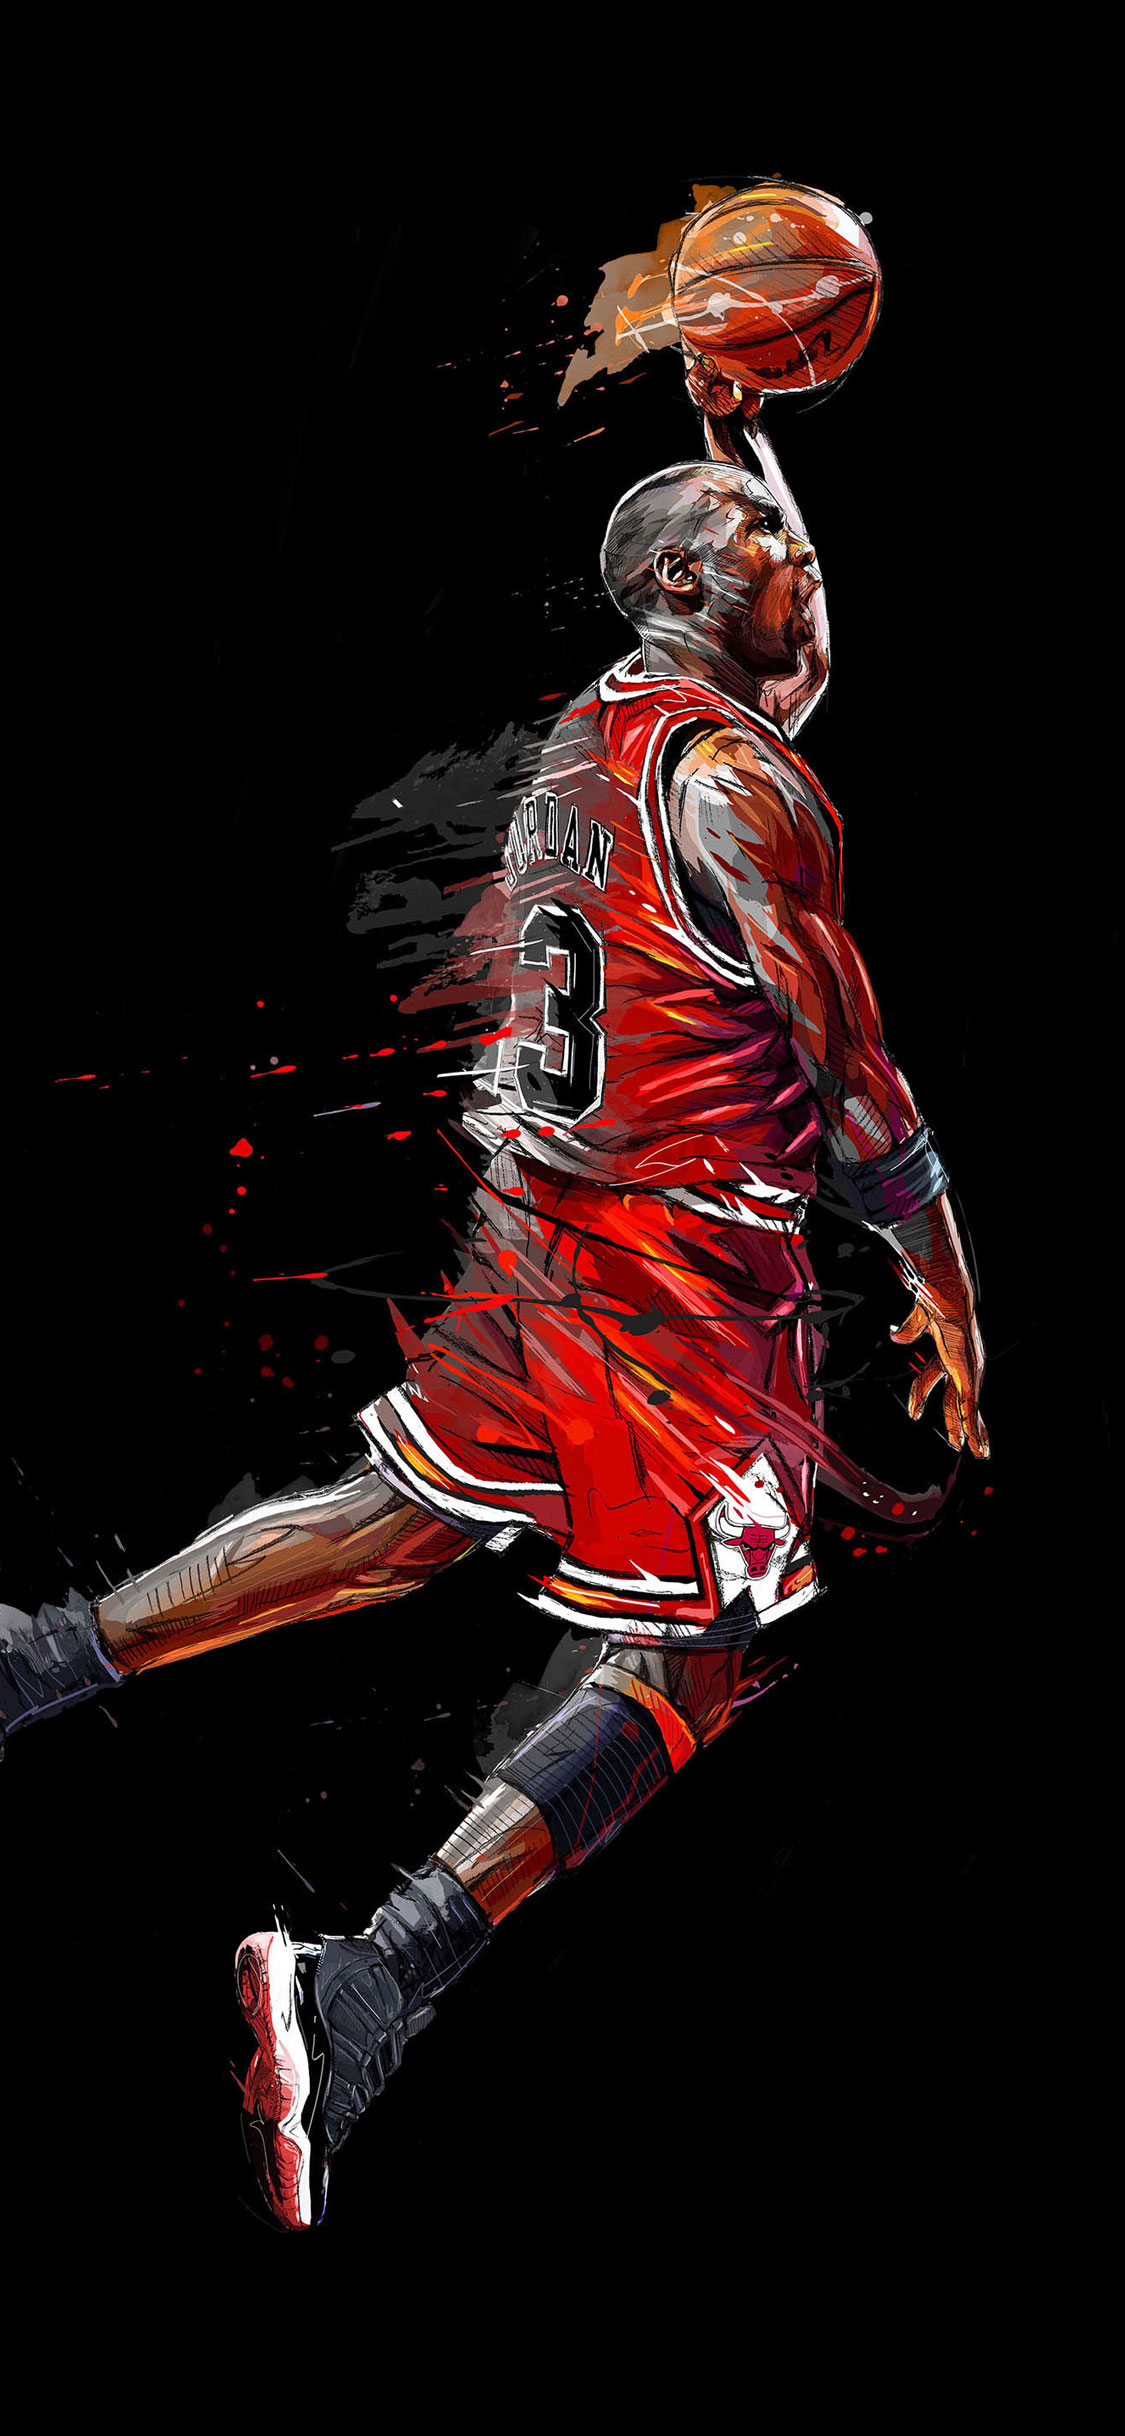 Cool Cool Basketball Wallpaper For Iphone pictures